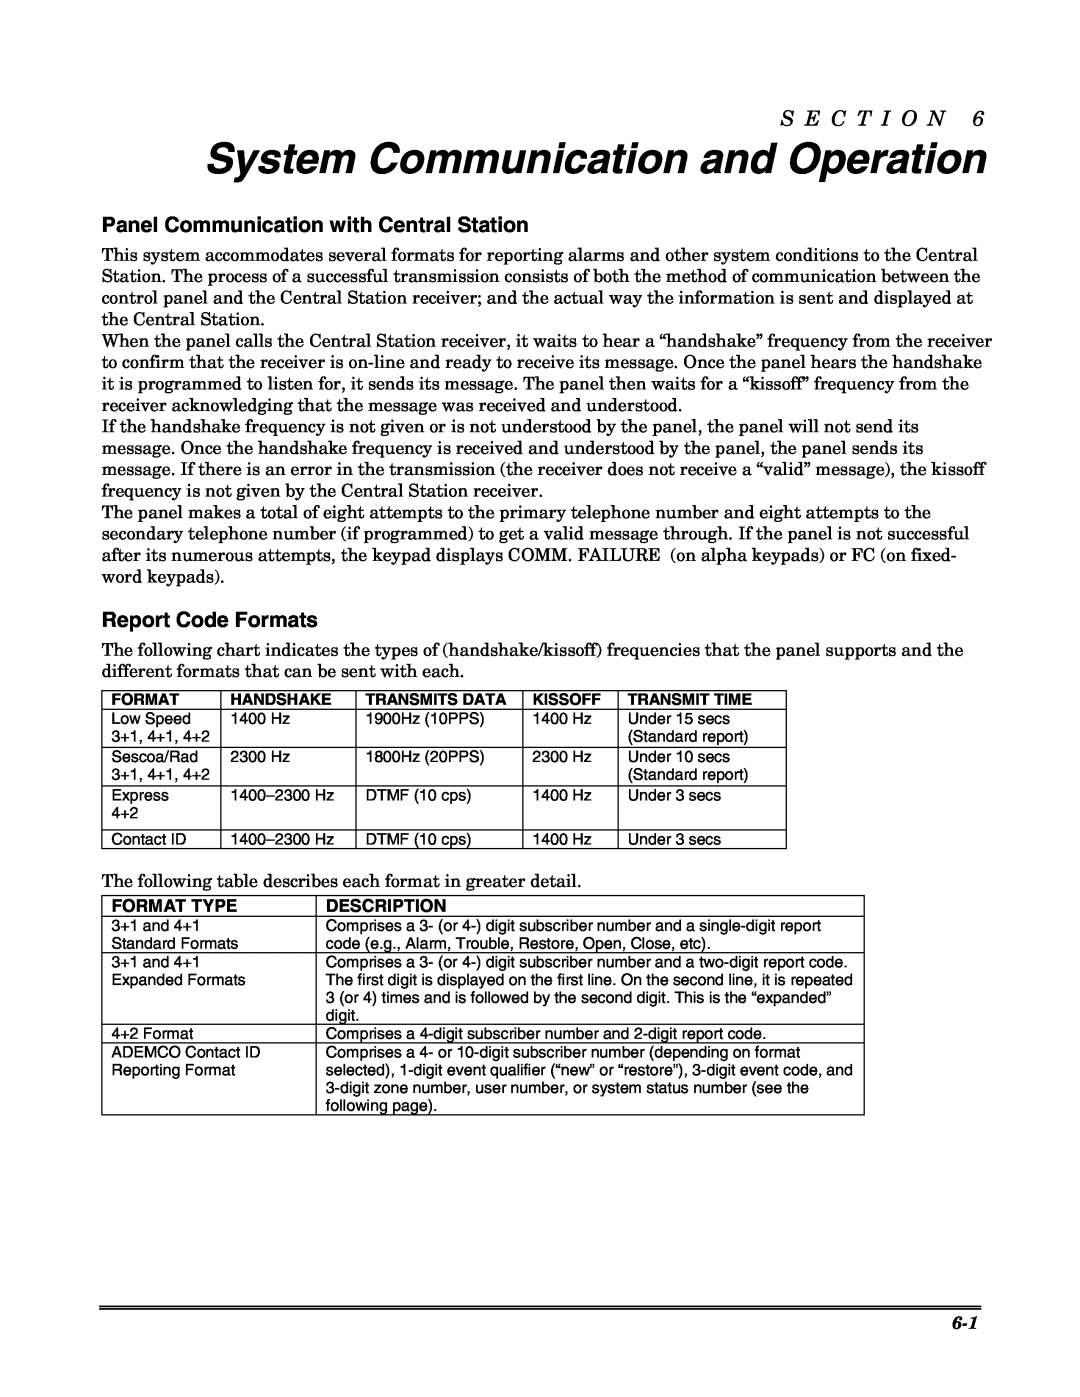 Honeywell VISTA 20P, VISTA-20PSIA, VISTA-15P, VISTA-15PSIA System Communication and Operation, Report Code Formats 